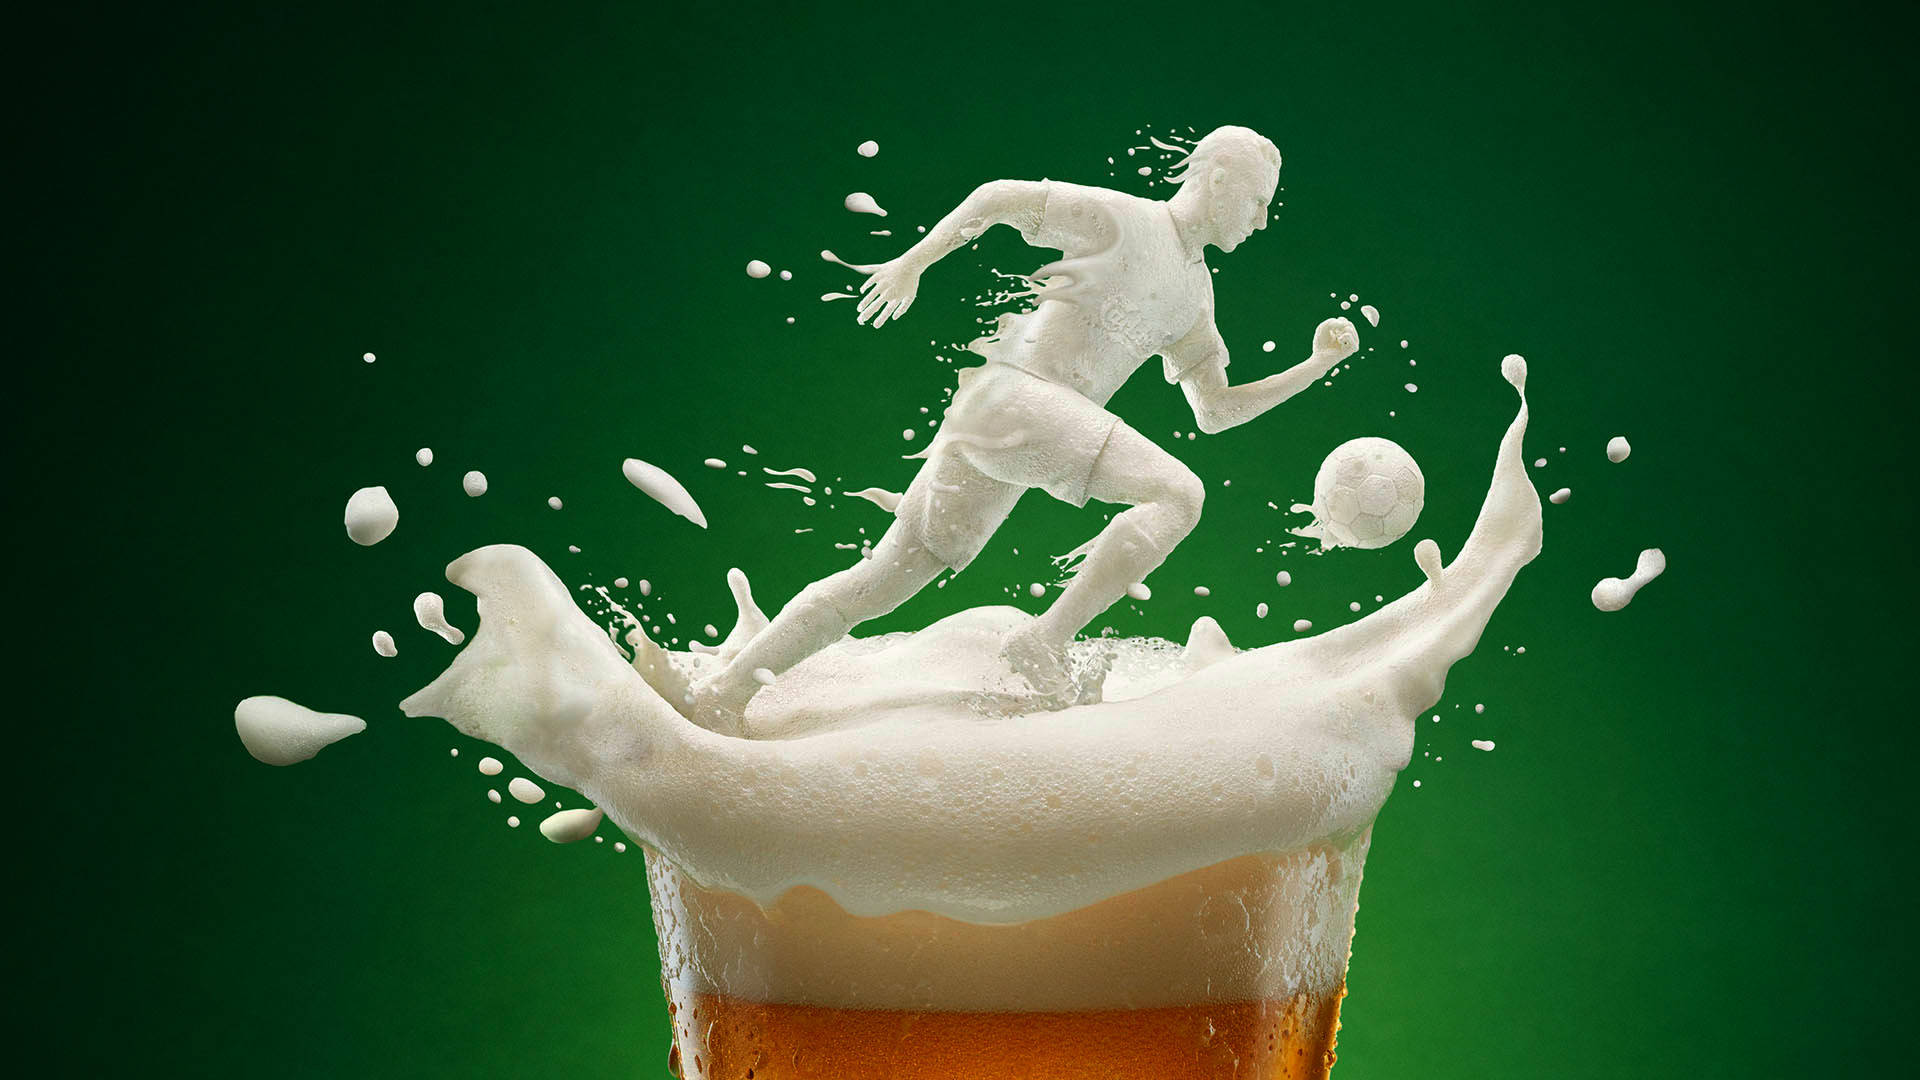 Carlsberg Beer Alcoholic Drink Creative Picture